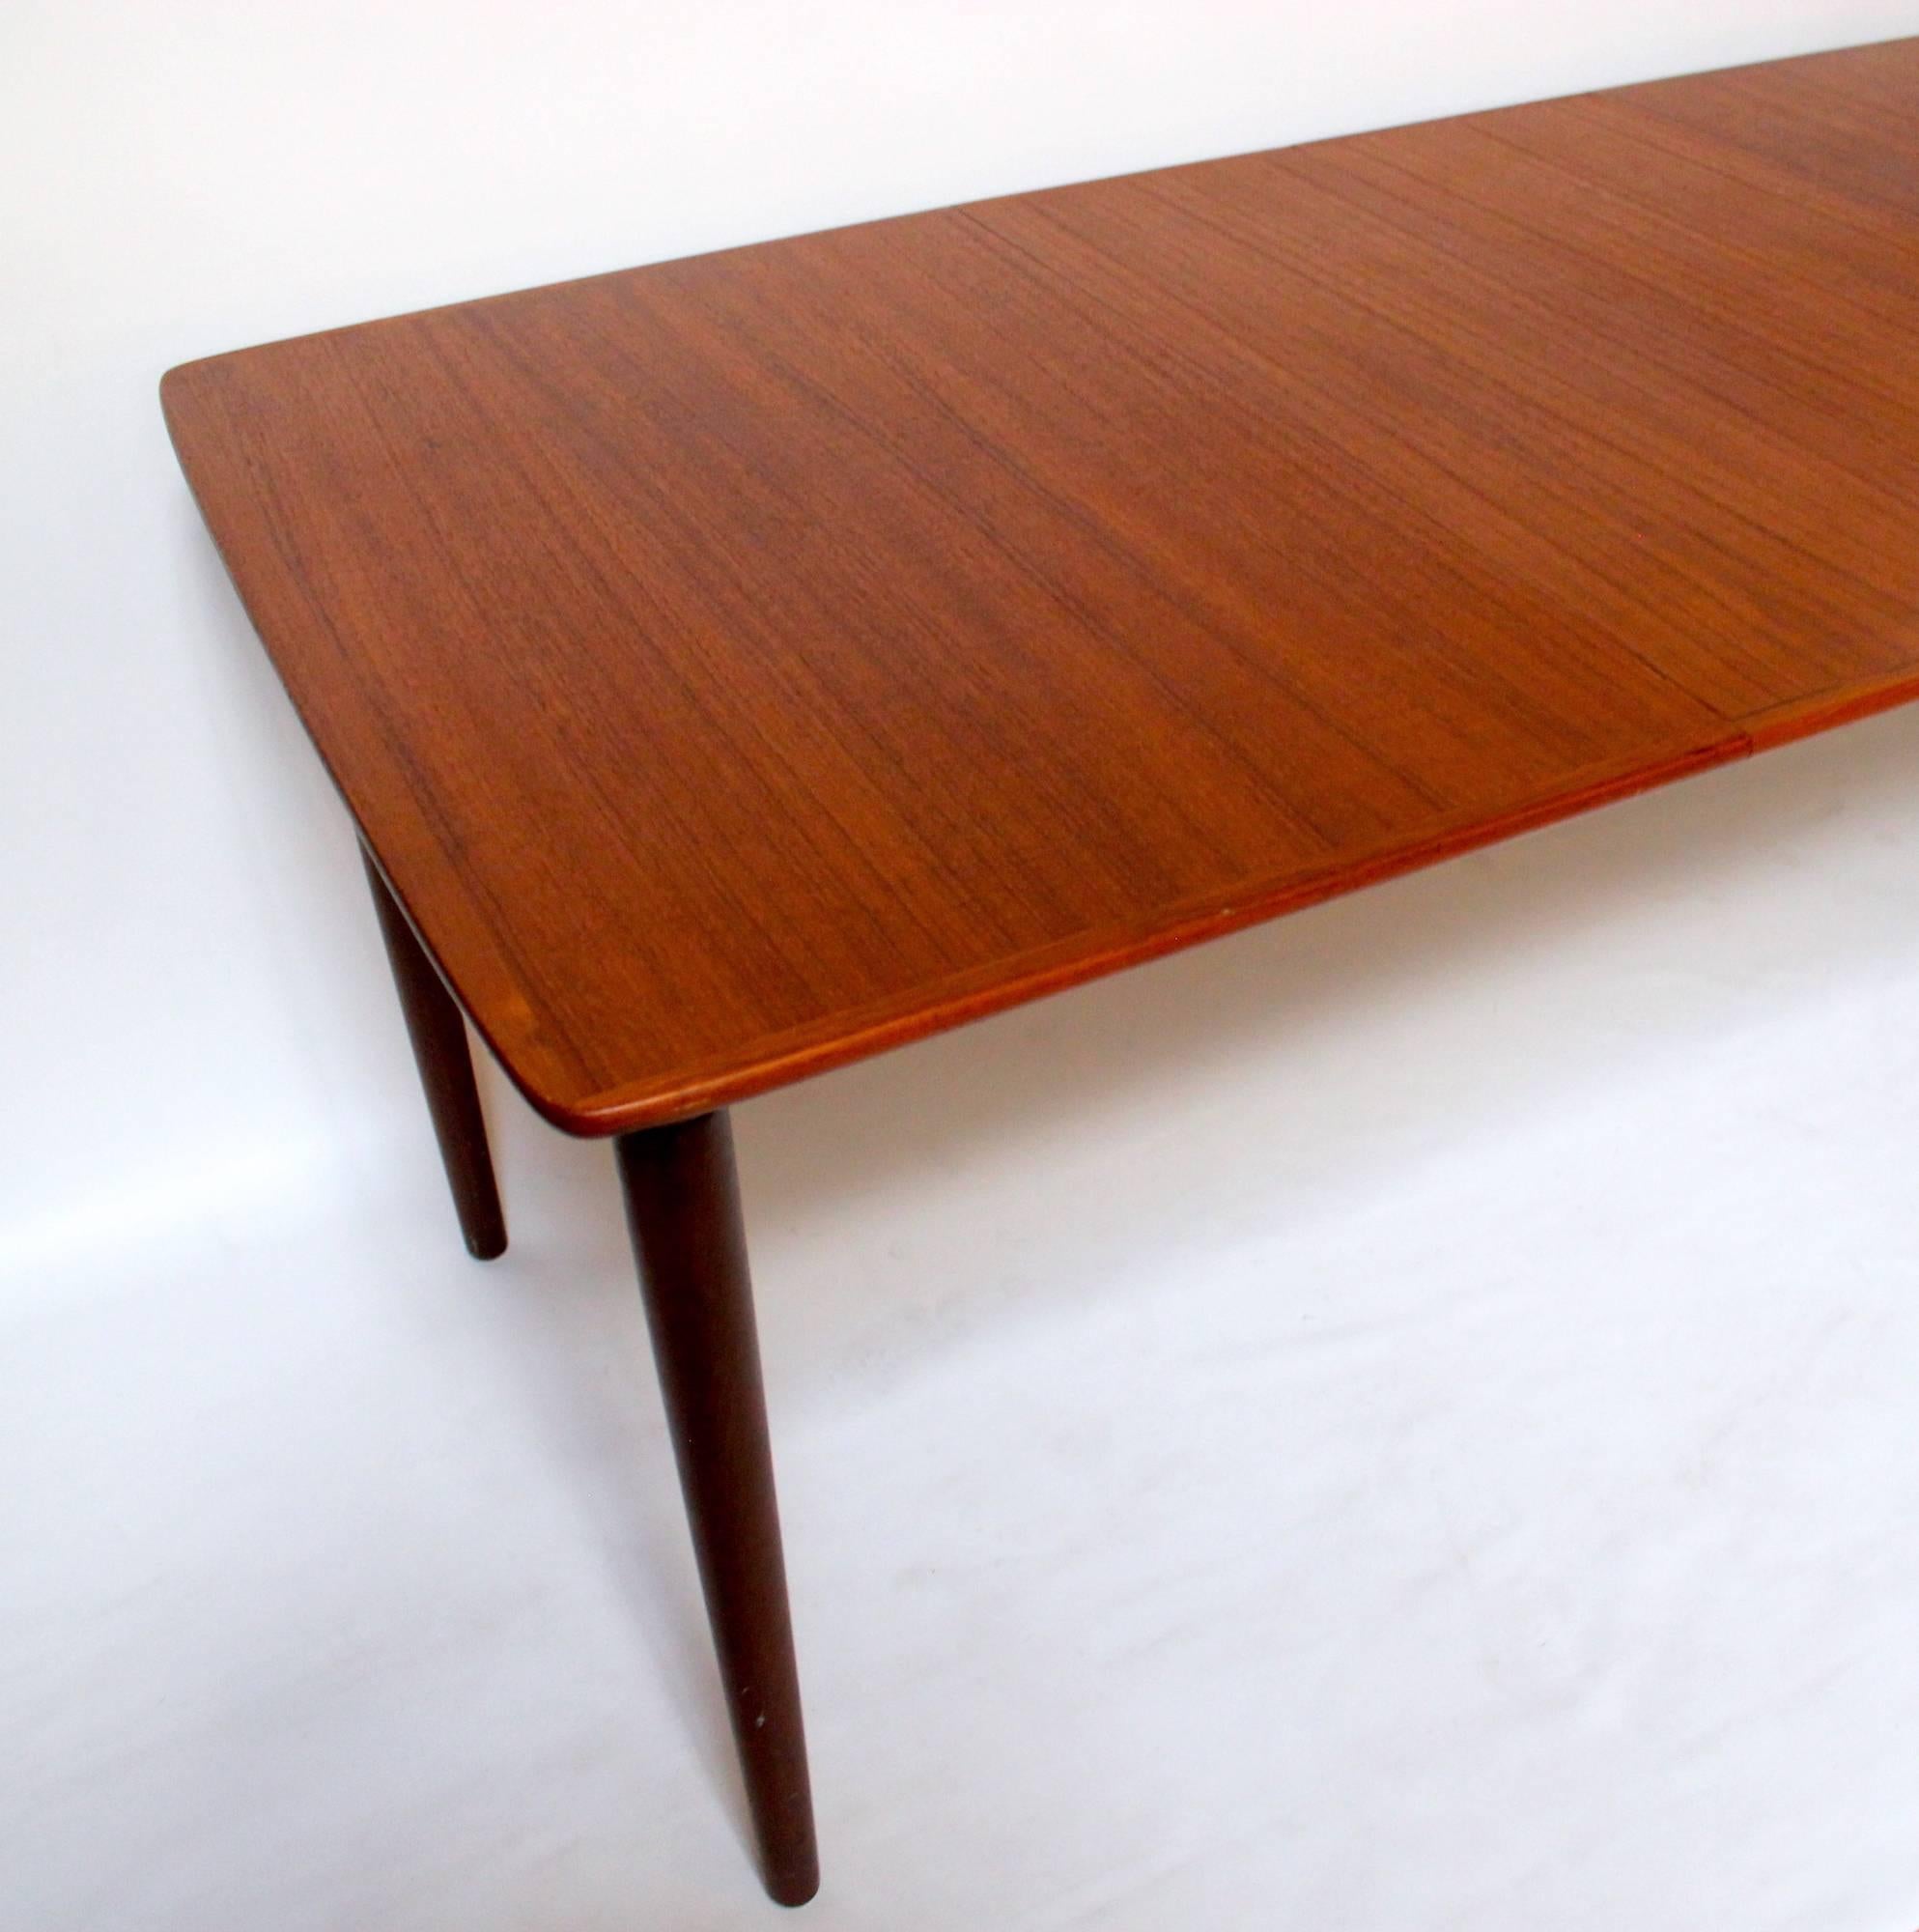 1960s Danish Modern Teak Dining Table with Two Leaves 2